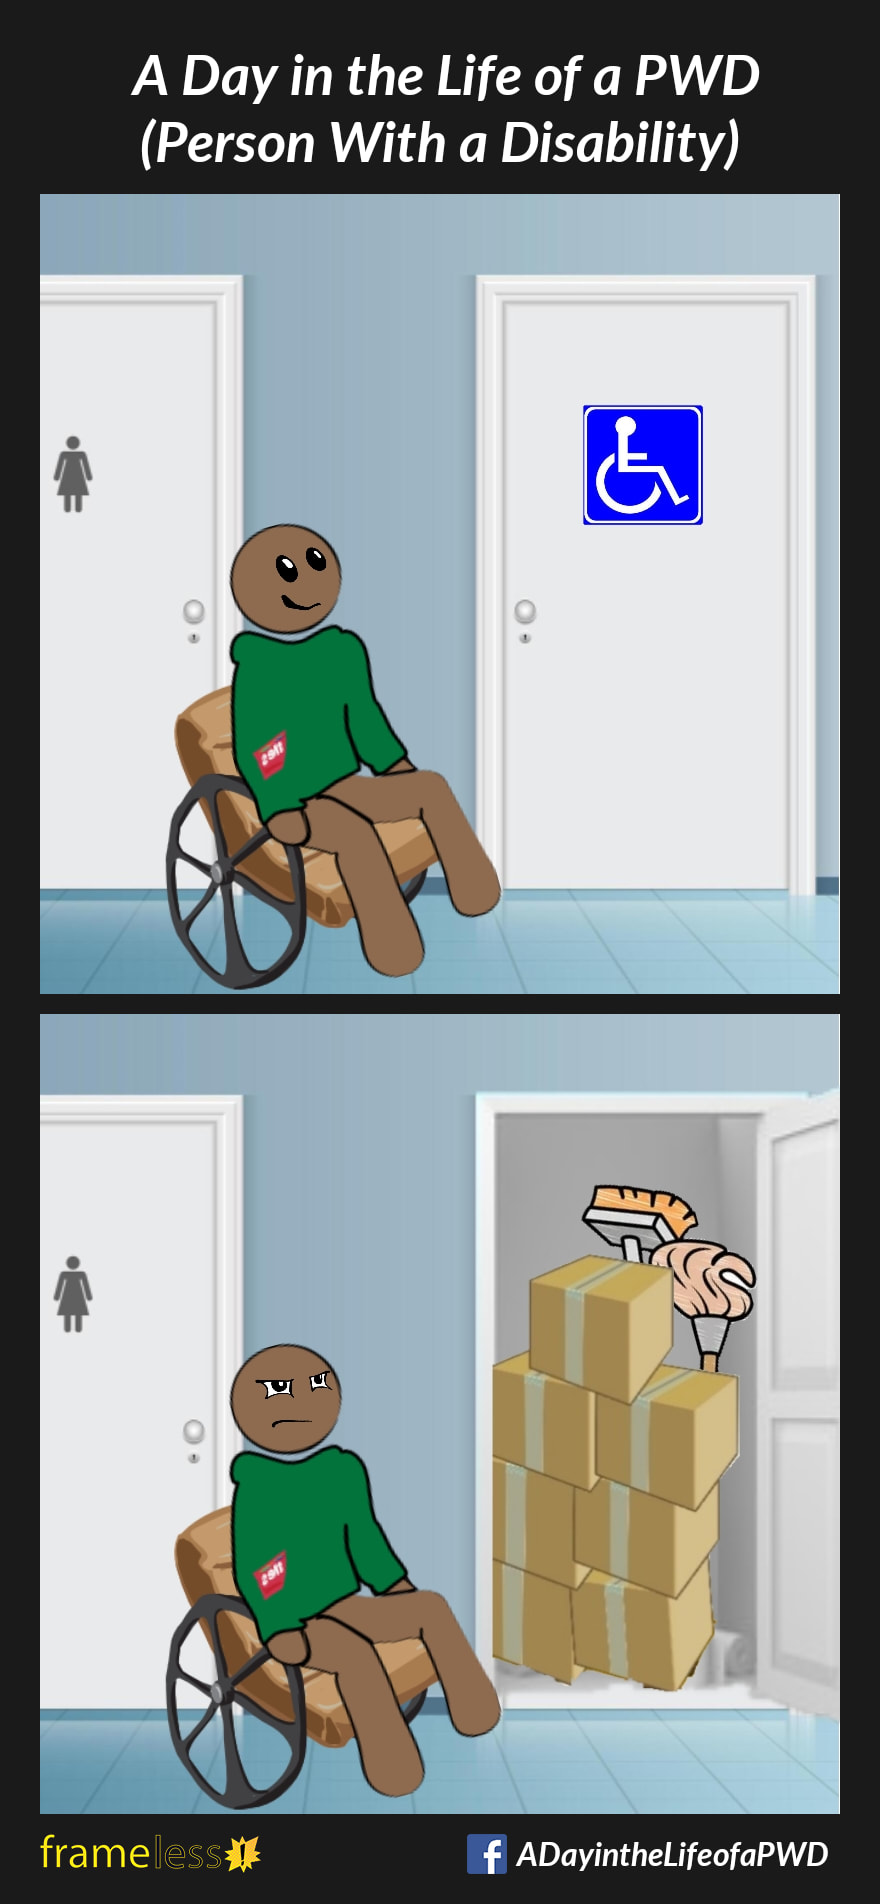 COMIC STRIP 
A Day in the Life of a PWD (Person With a Disability) 

Frame 1:
A man in a wheelchair approaches a wheelchair accessible bathroom 

Frame 2:
When the man opens the door, he sees the bathroom is filled with boxes and cleaning supplies.